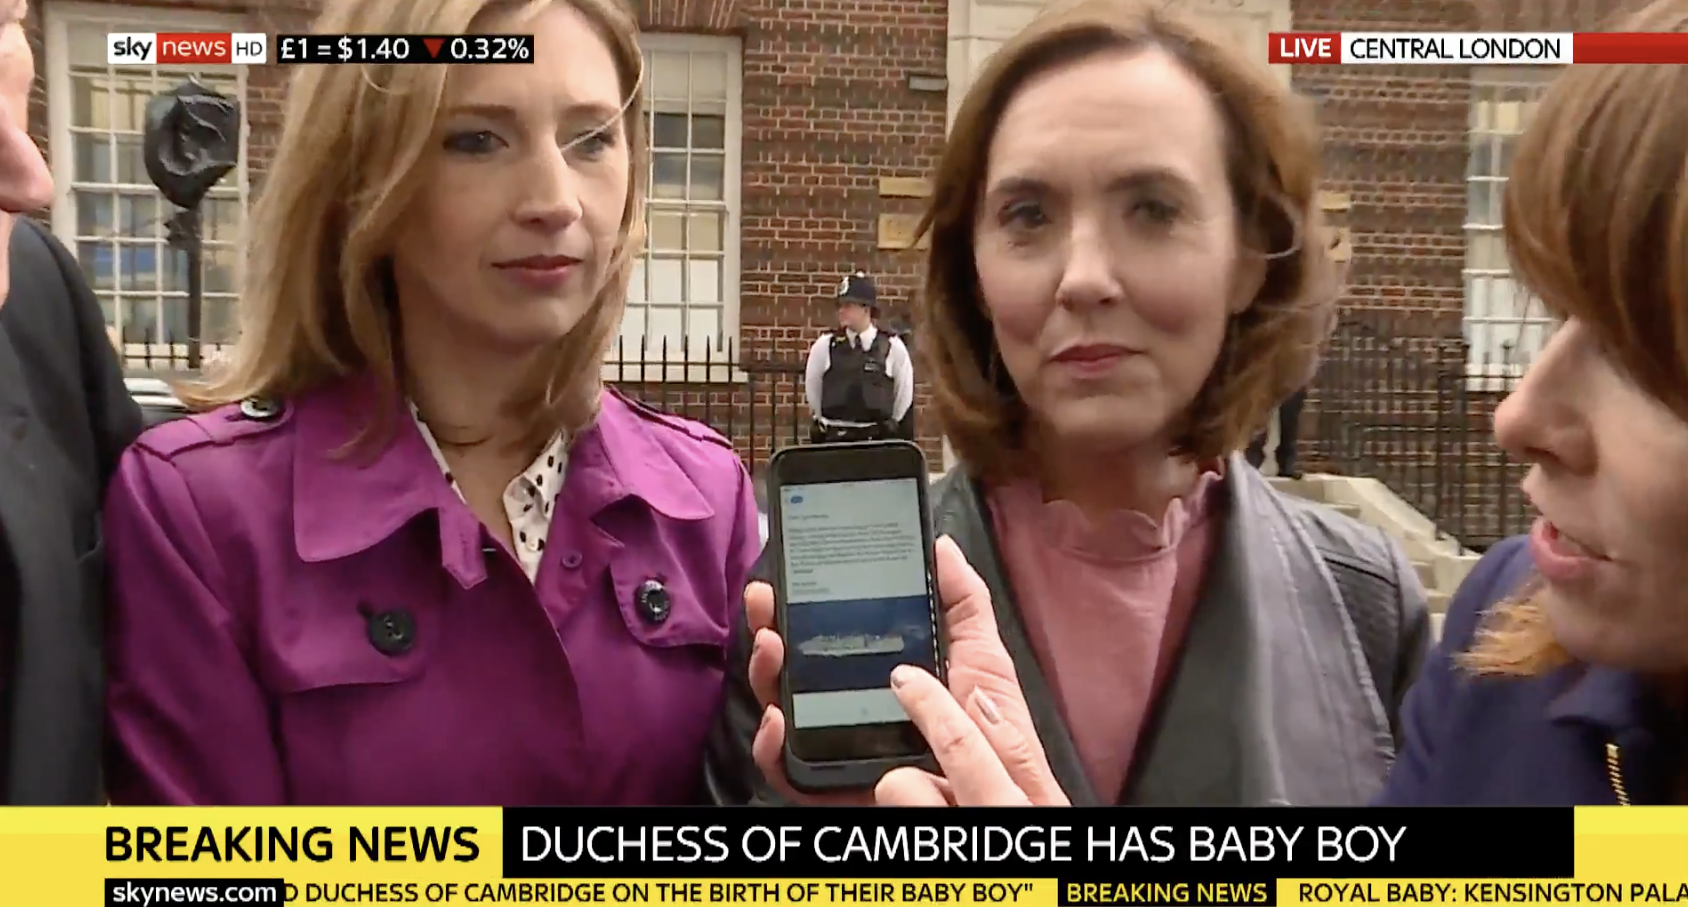 Royal Baby coverage